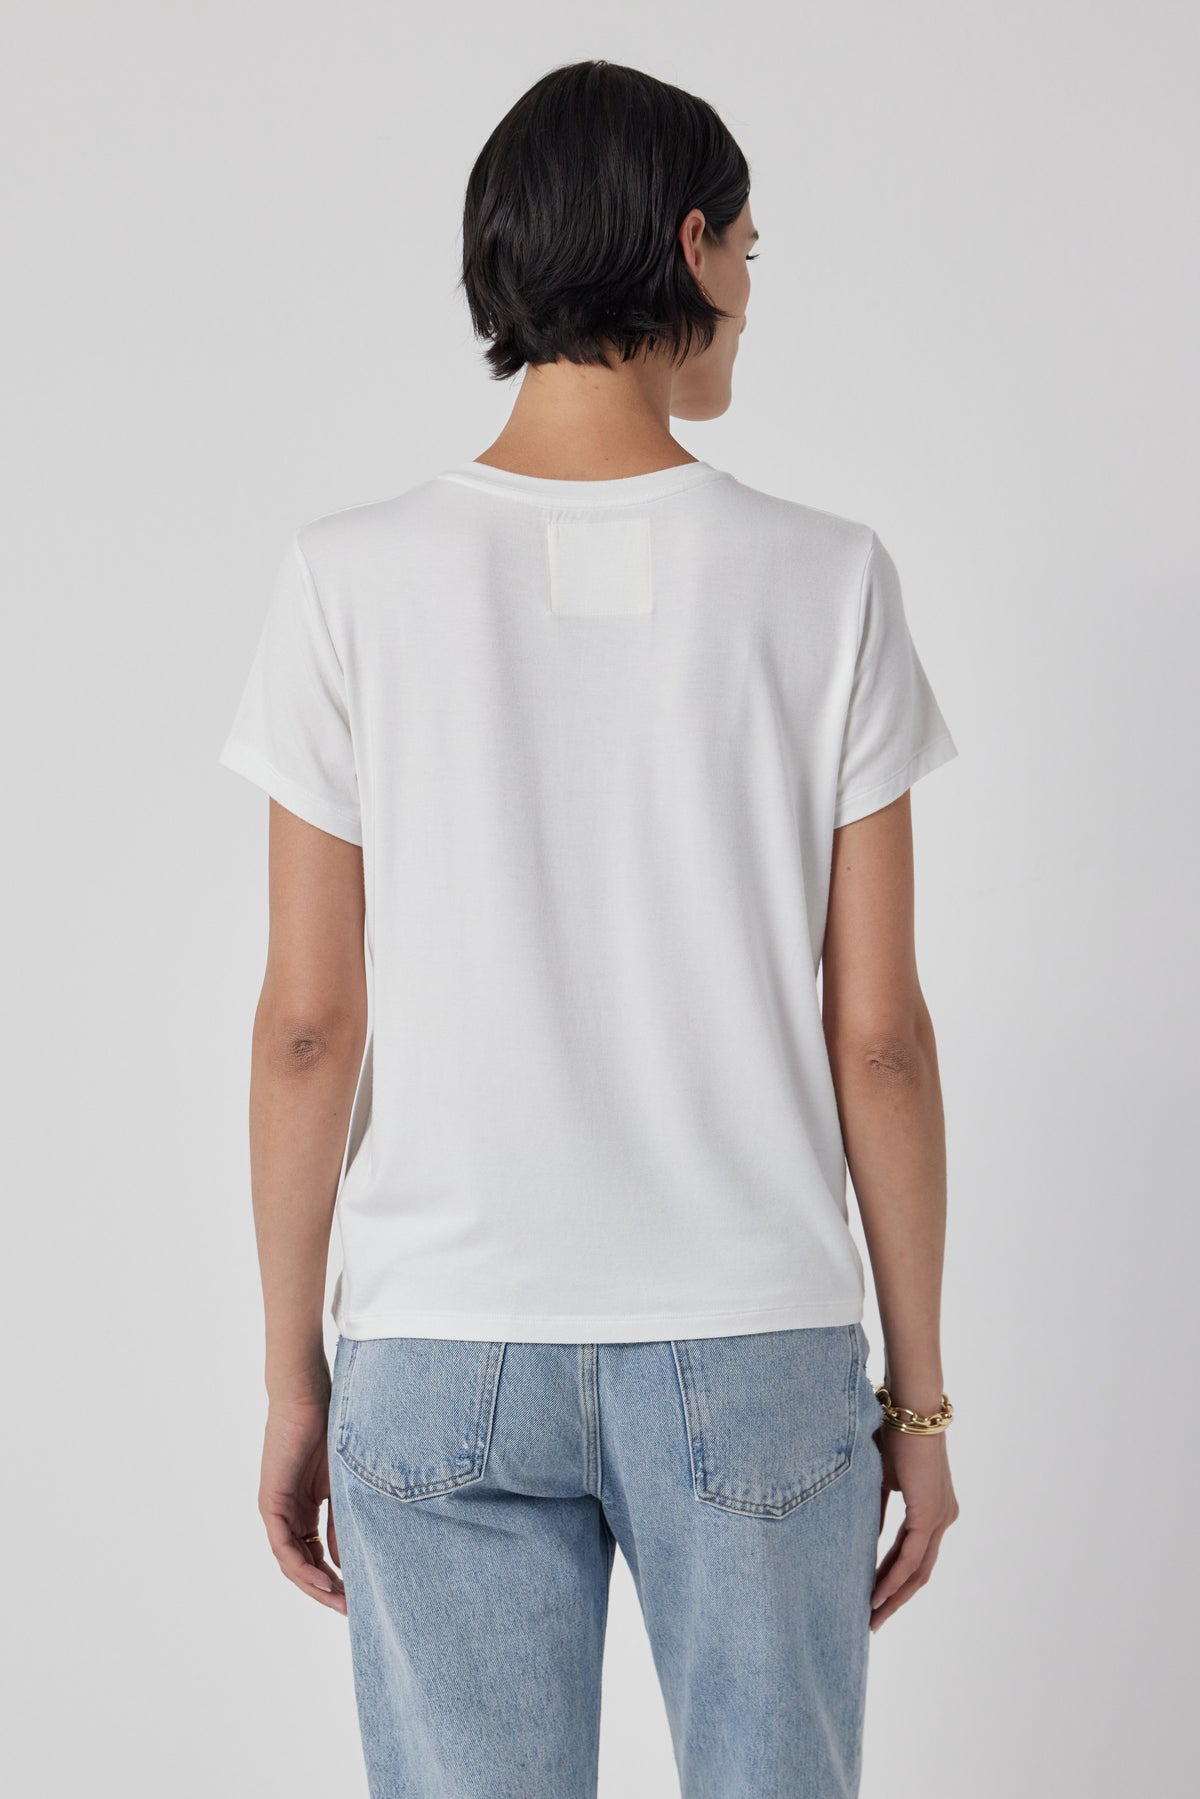 The woman is wearing a white Velvet by Jenny Graham SOLANA TEE and jeans, showing off the shrunken sleeve.-36002416787649